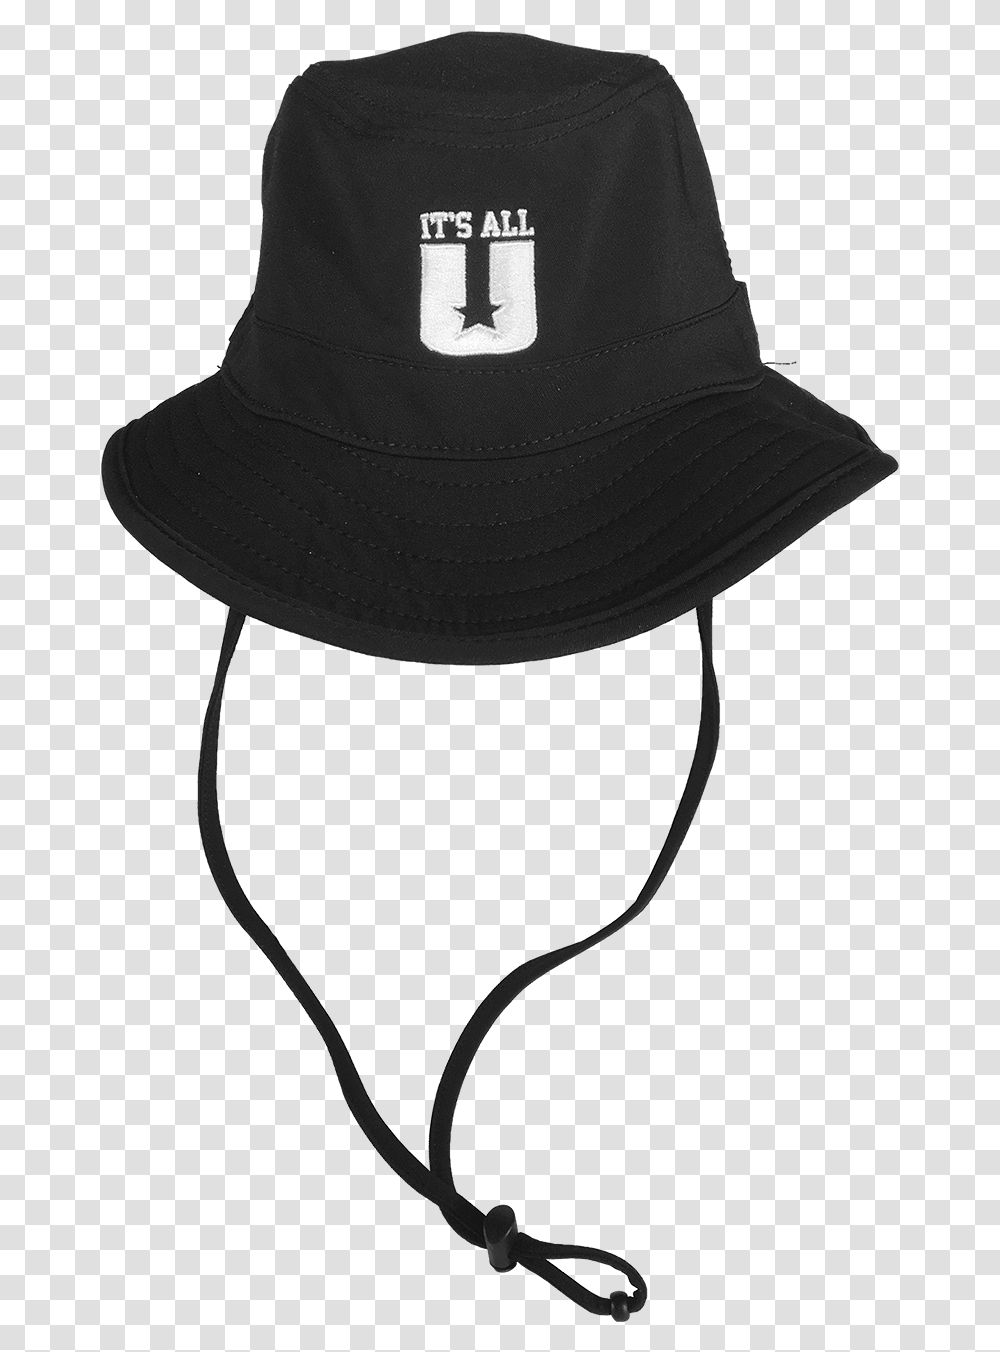 If You Do Not Have A Bucket Hat Or Are Looking For Fedora, Apparel, Sun Hat, Baseball Cap Transparent Png